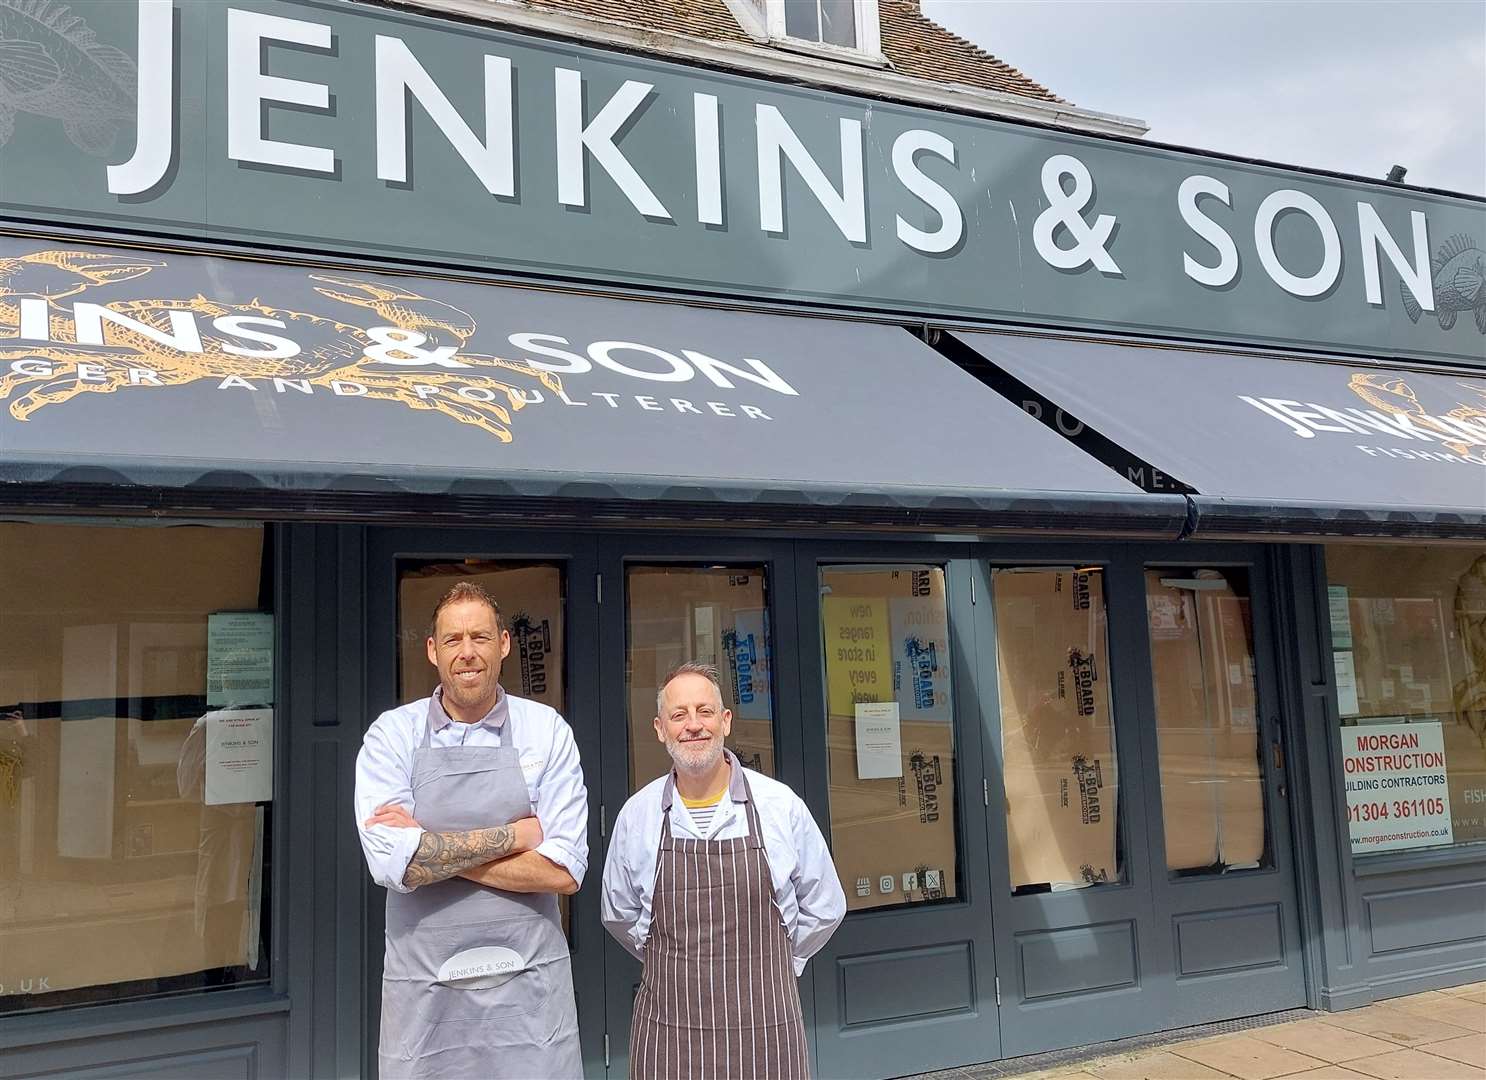 Owner Darren Jenkins and head chef Peter Keyes from Jenkins and Son Fishmonger in Deal outside their new store, the former JC Rooks unit